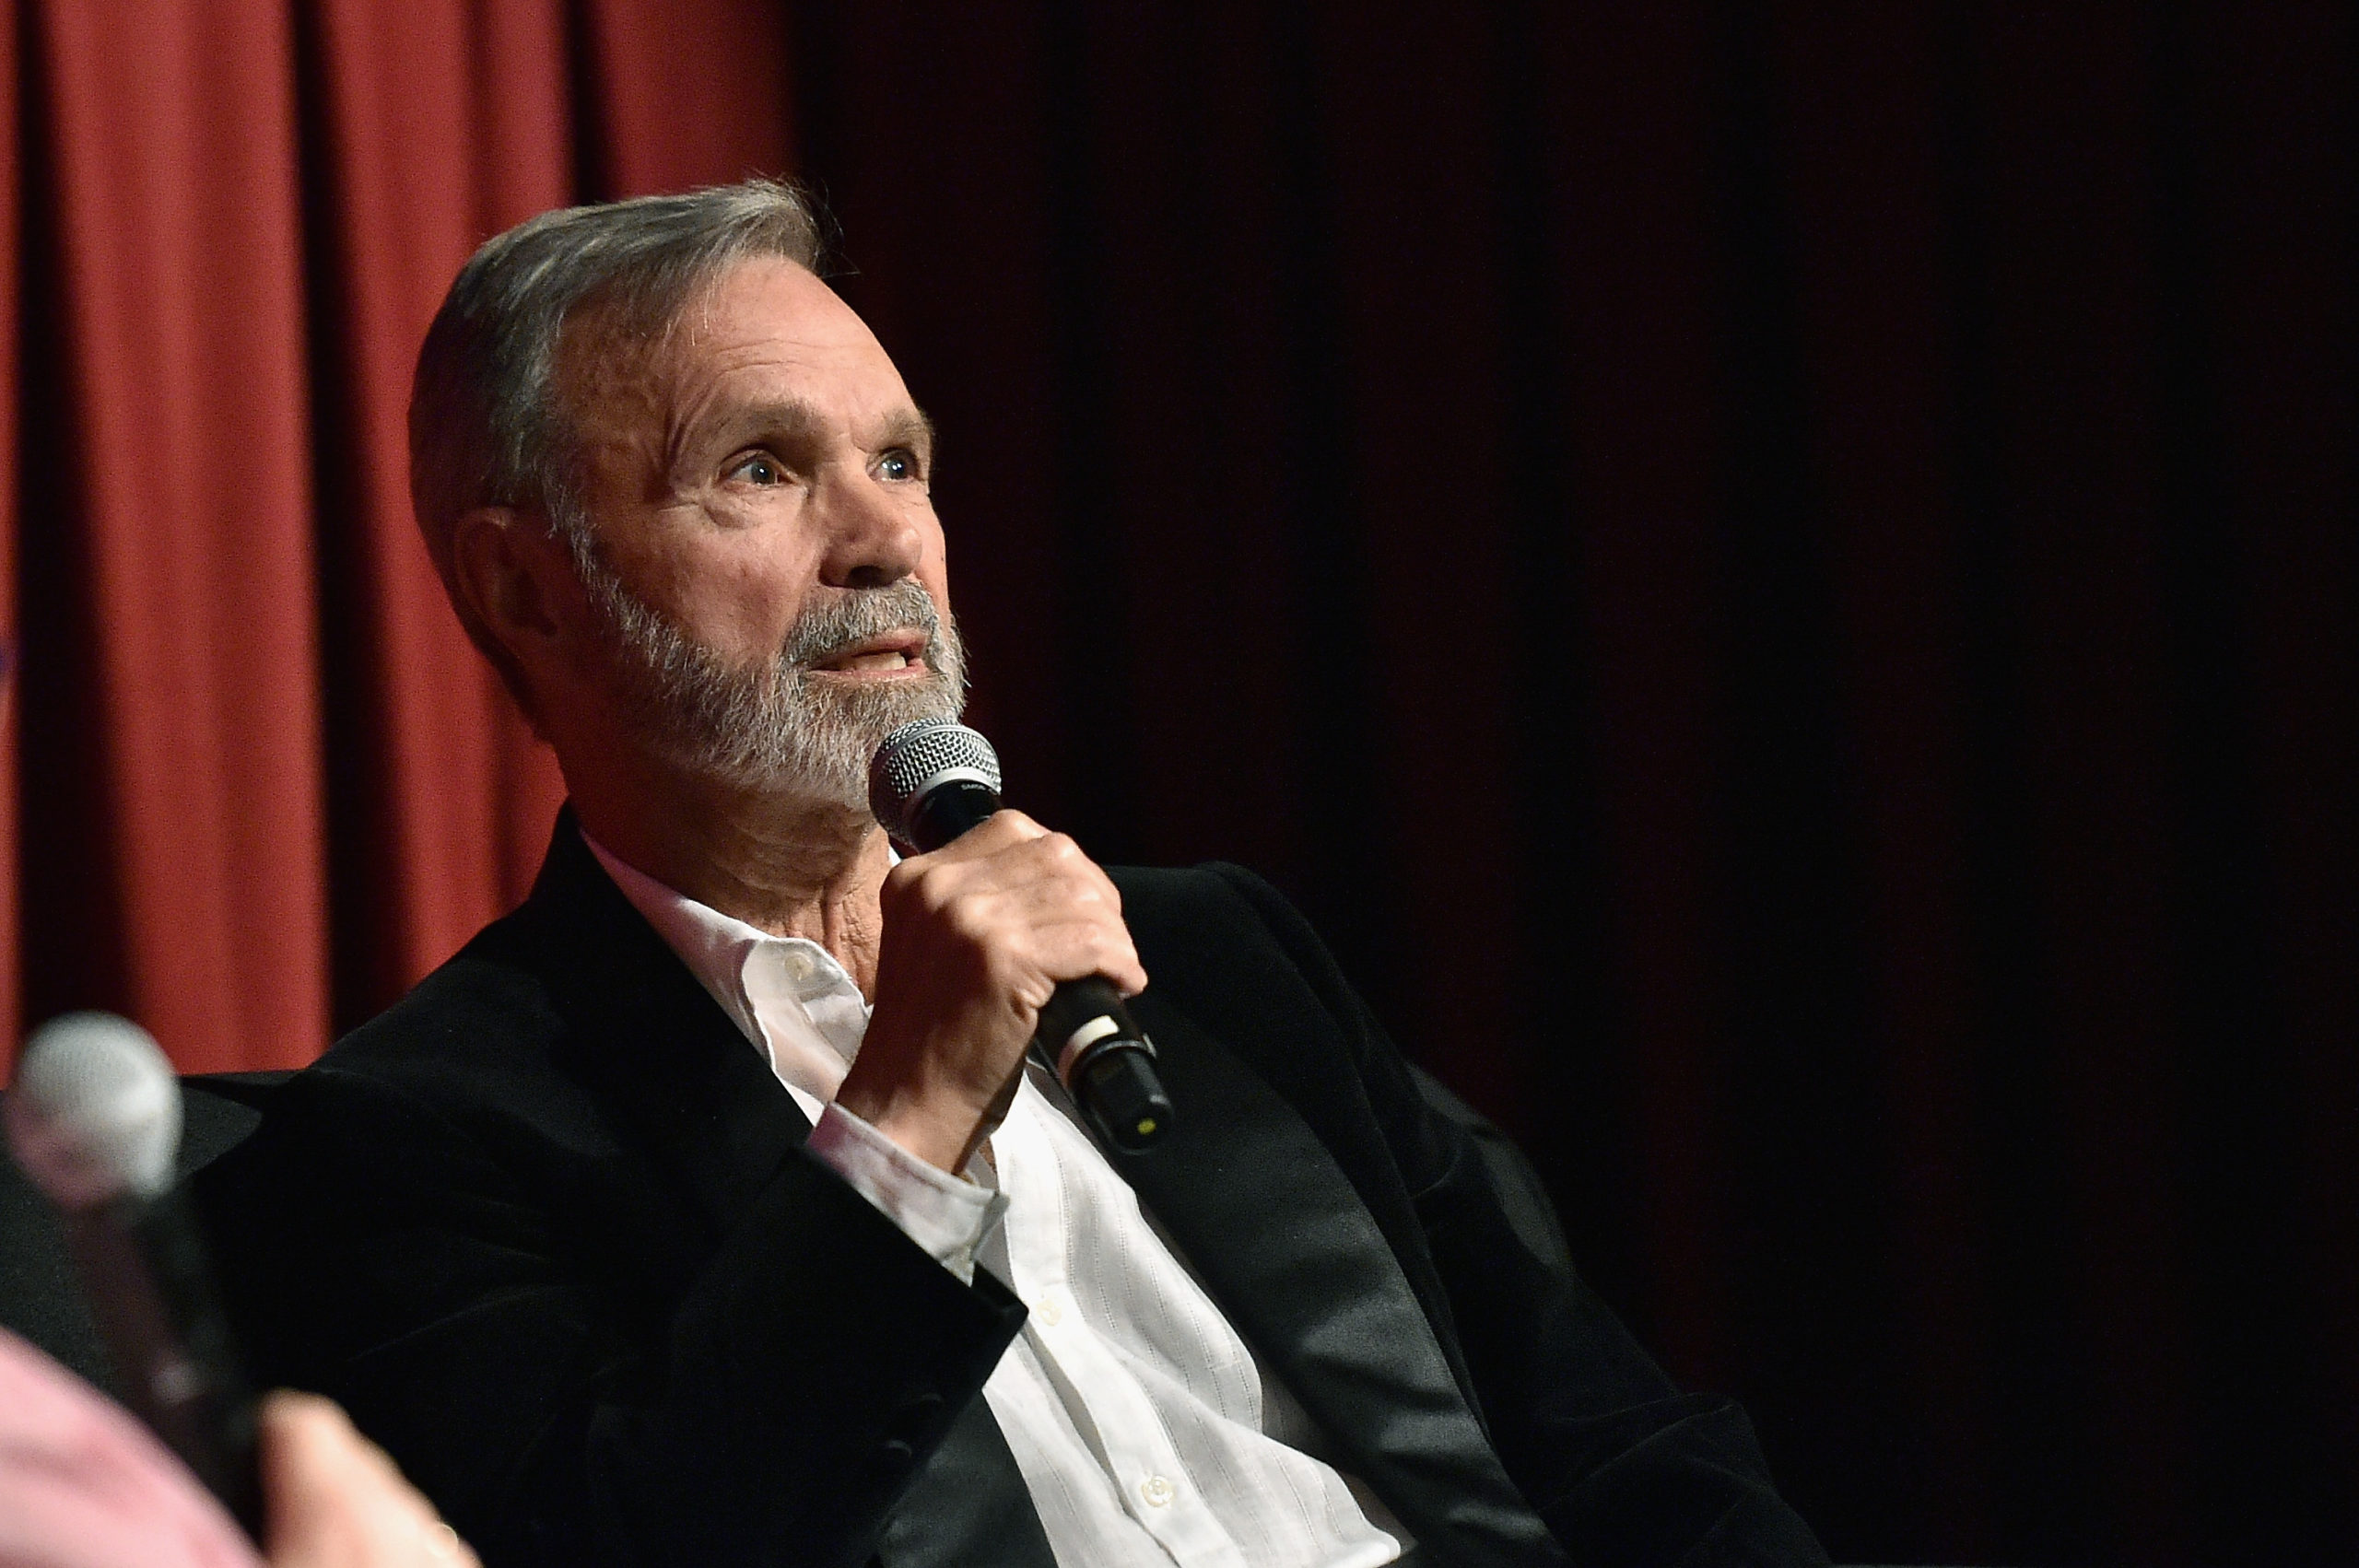 LOS ANGELES, CA - APRIL 29: Actor Darryl Hickman speaks onstage at 'Tea and Sympathy' screening during day 2 of the TCM Classic Film Festival 2016 on April 29, 2016 in Los Angeles, California. 25826_008 (Photo by Mike Windle/Getty Images for Turner)